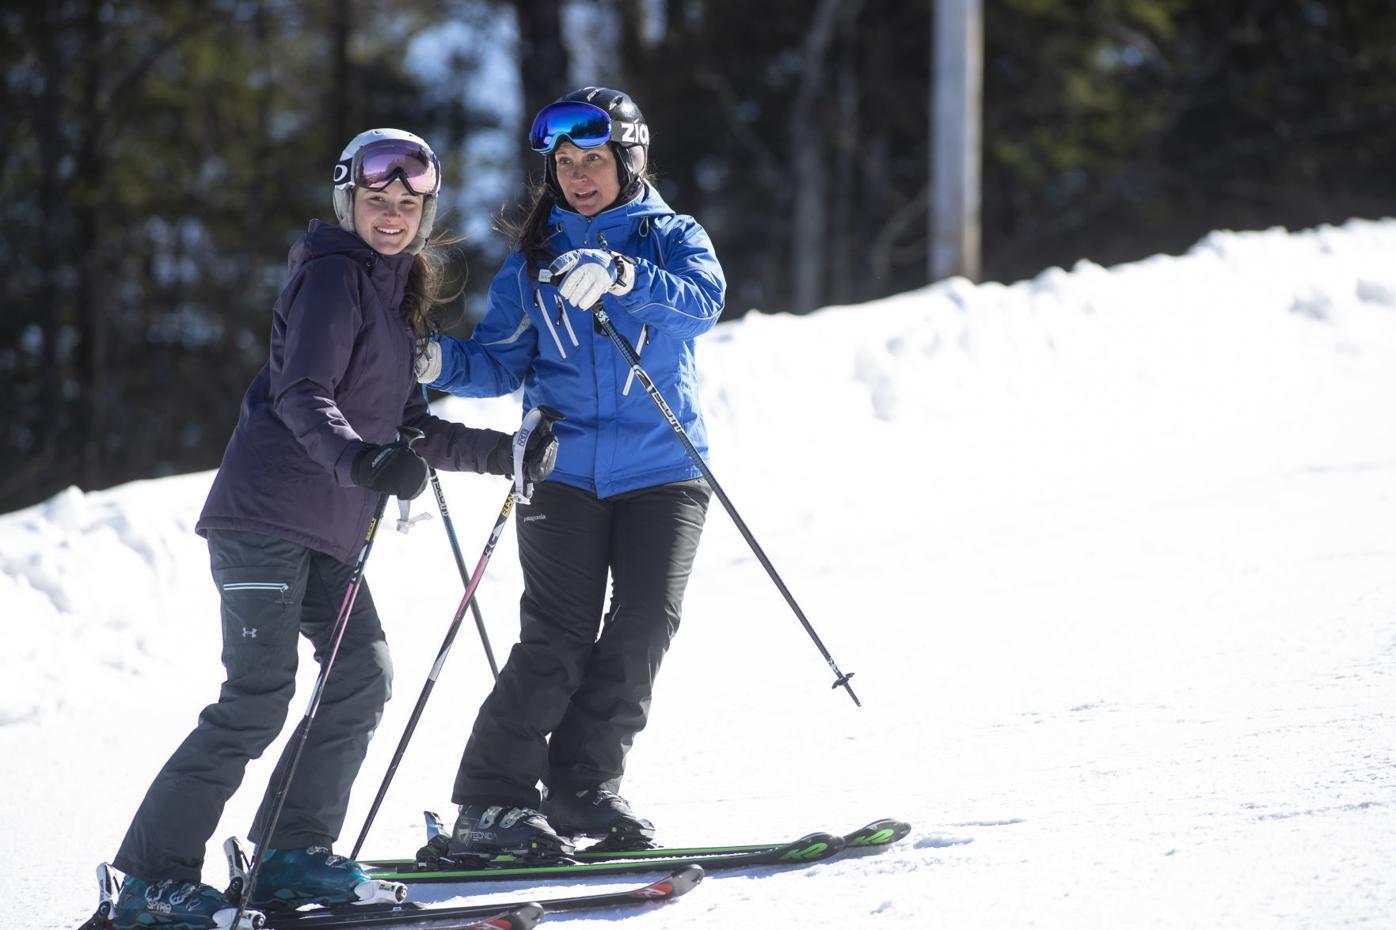 Student at Pats Peak learns from her instructor